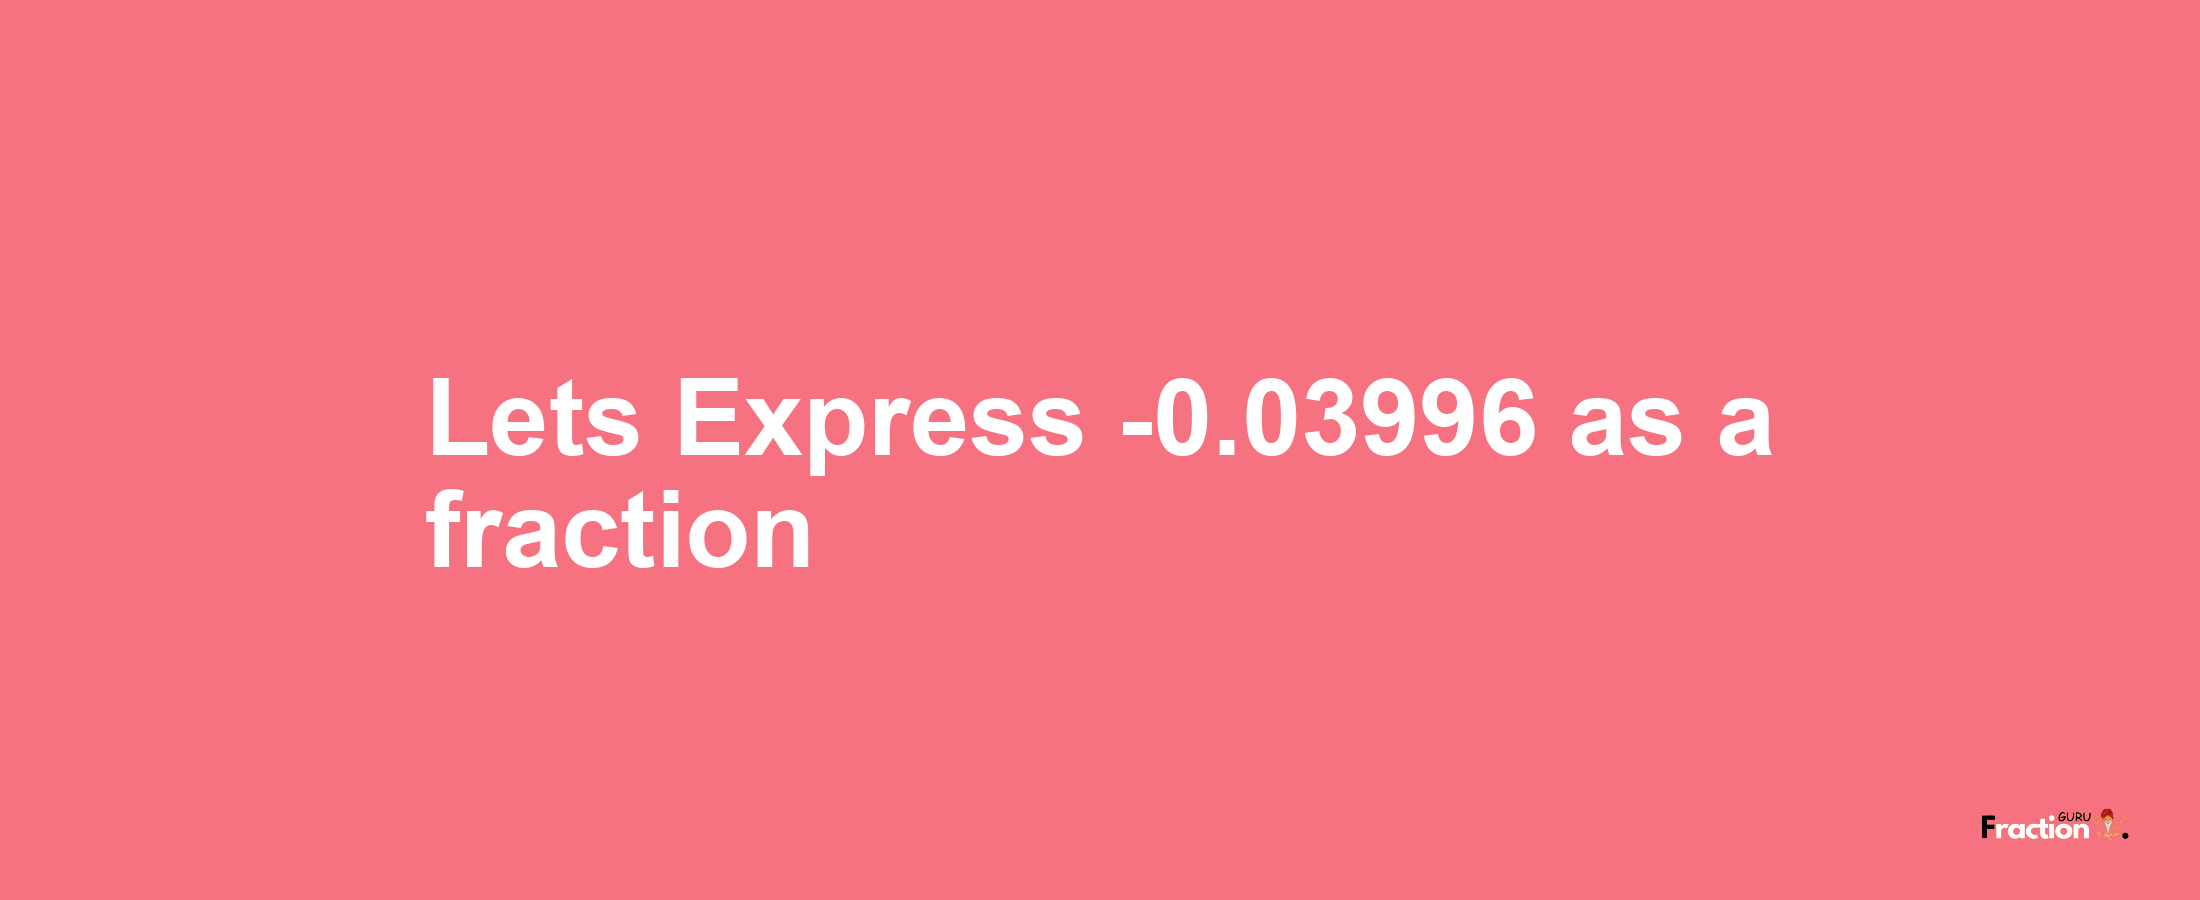 Lets Express -0.03996 as afraction